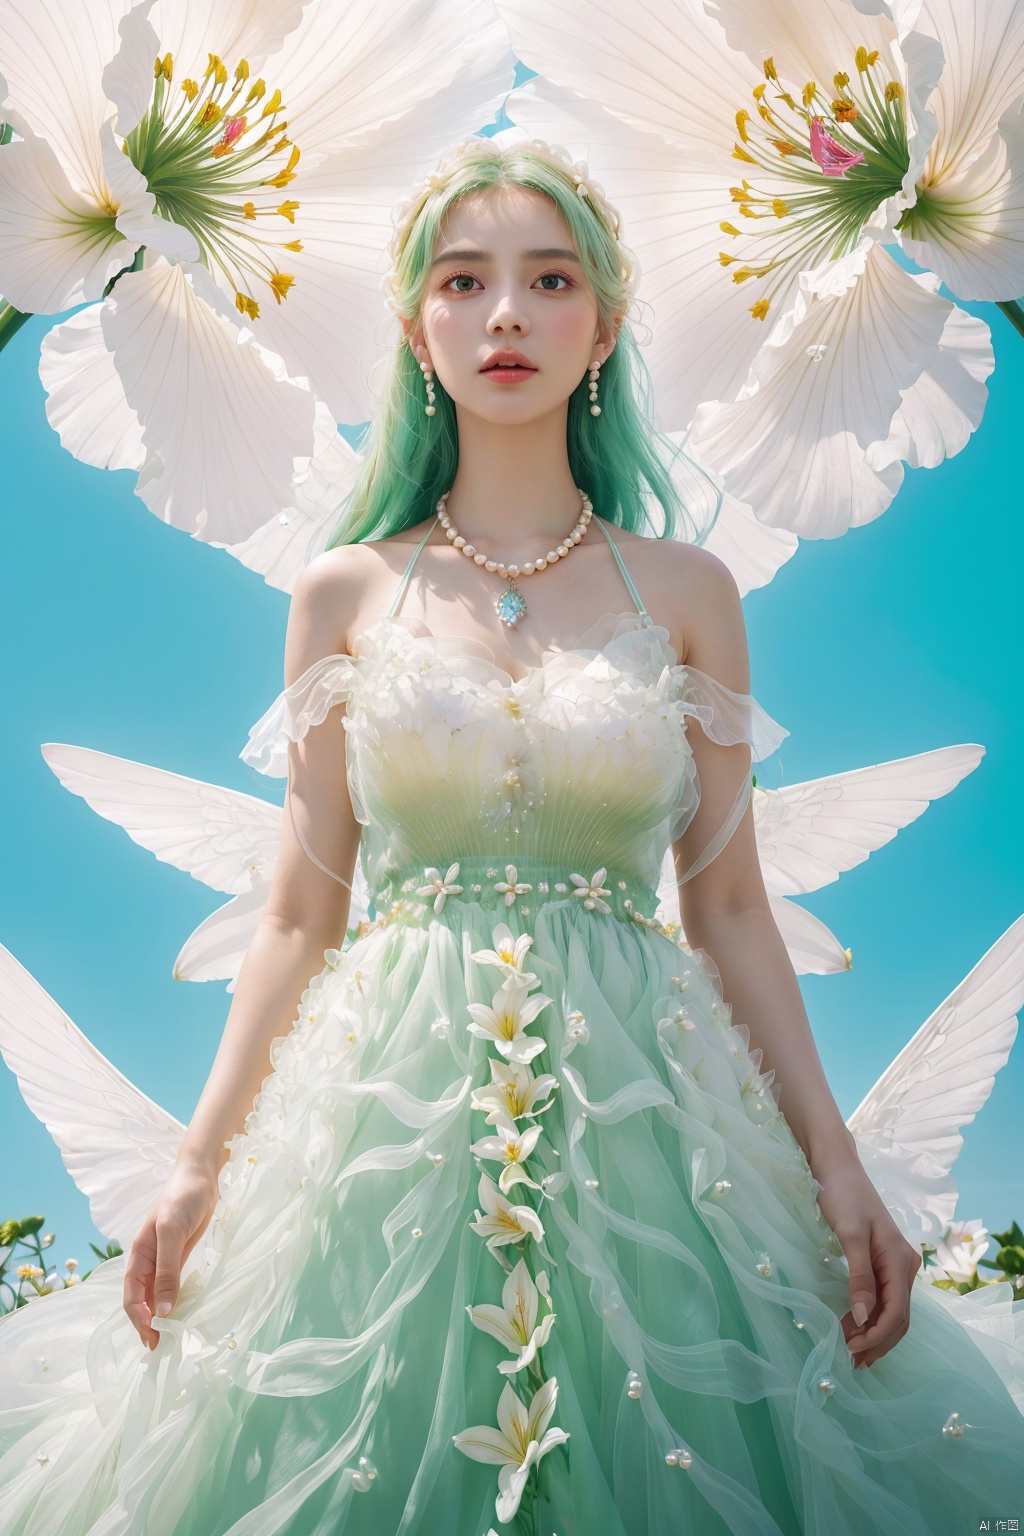  Quality, 8K, extremely intricate details, 1 girl, Lolita, gradient color, careful eyes, transparent wings, gradient art, in the flowers, (huge lily :1.1), sky, (White cloud :0.9), full lens, necklace, pearls and jewelry, 1 girl, flowing dress, light green dress, huge flowers, wide Angle, hdr